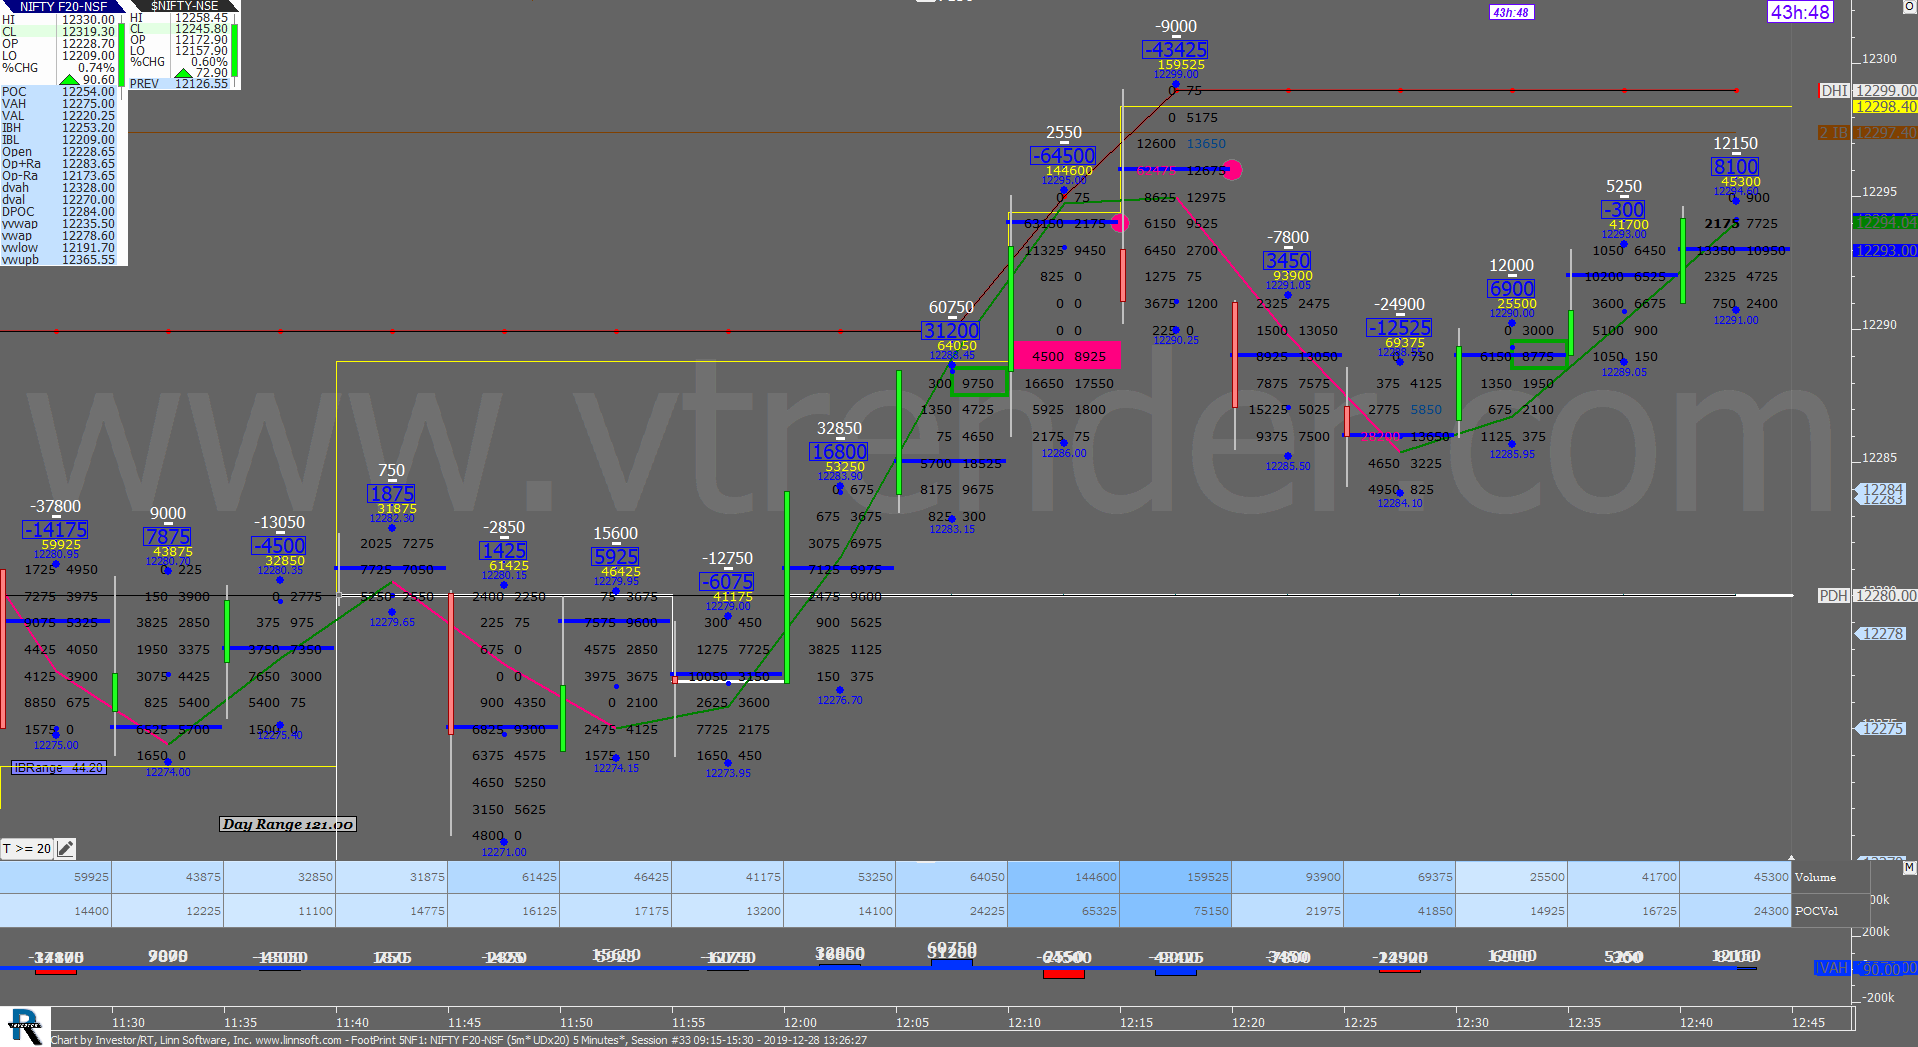 3 30 Order Flow Charts Dated 27Th Dec (5 Mins) Banknifty Futures, Day Trading, Intraday Trading, Intraday Trading Strategies, Nifty Futures, Order Flow Analysis, Support And Resistance, Trading Strategies, Volume Profile Trading